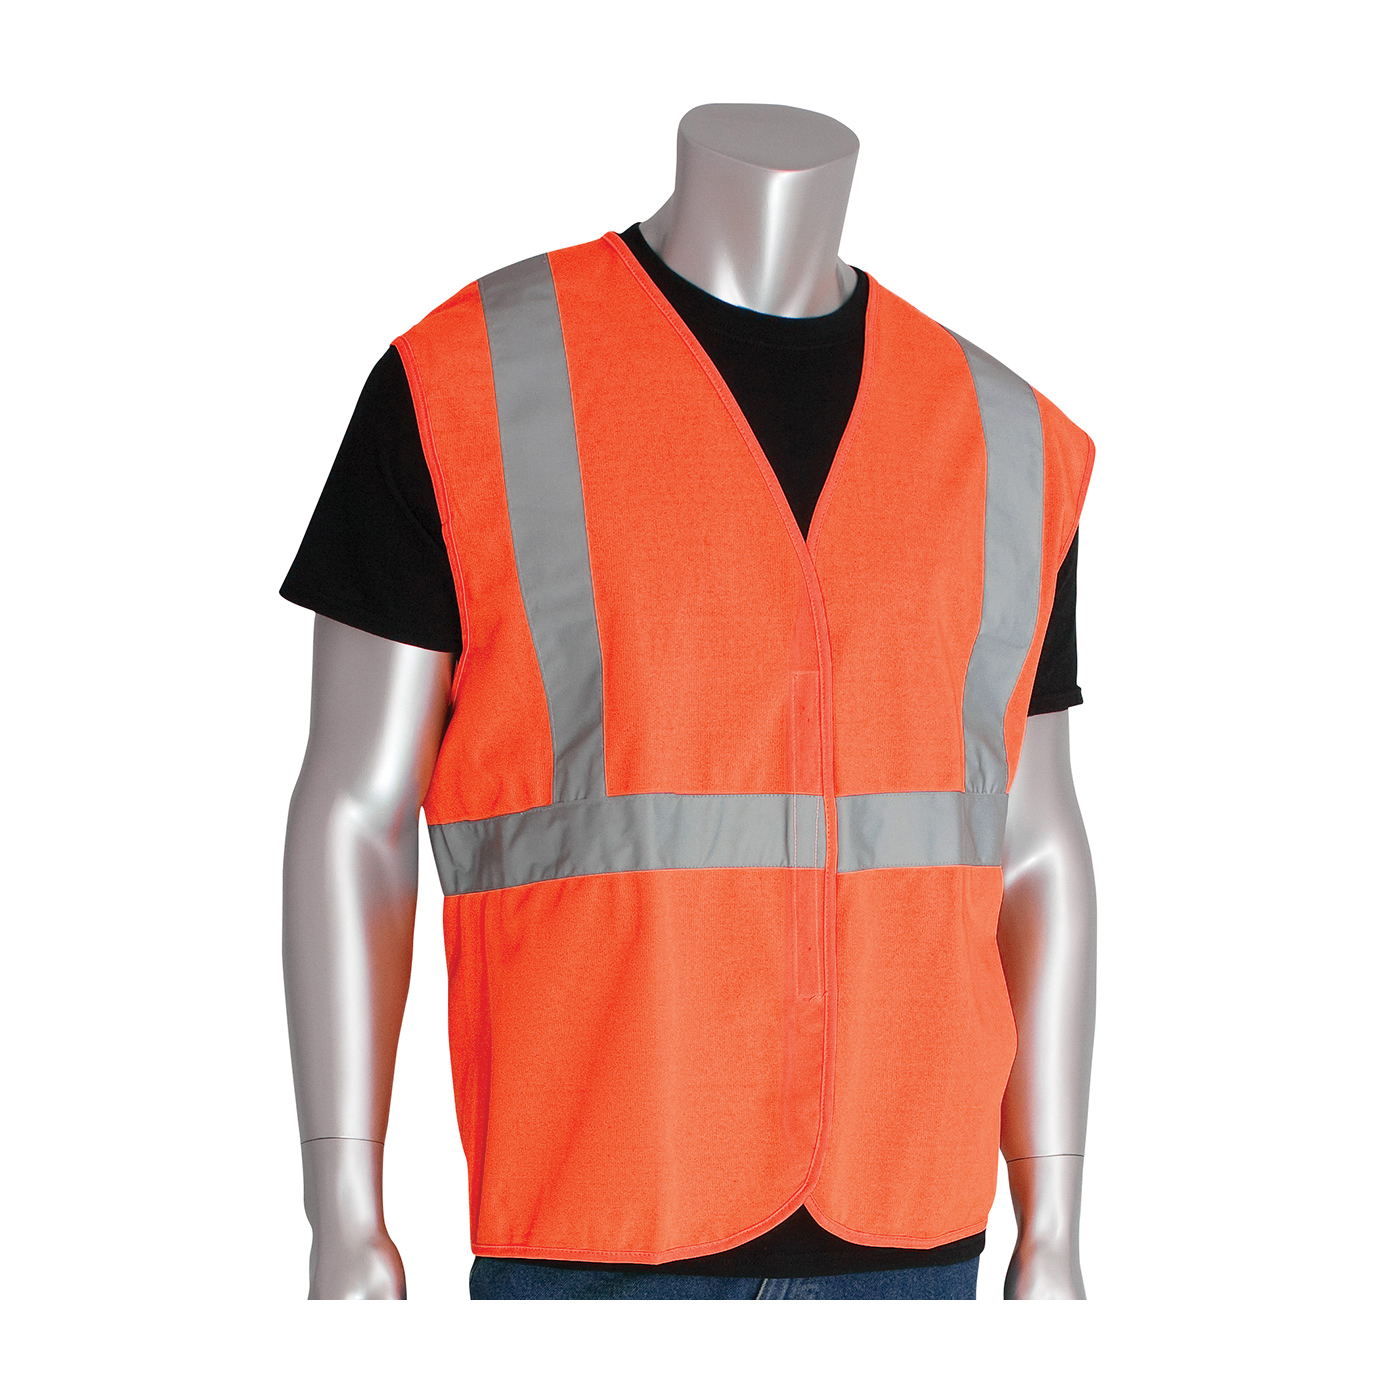 PIP® 302-WCENGOR-3X Solid Vest, 3XL, Hi-Viz Orange, Polyester, Hook and Loop Closure, ANSI Class: Class 2, Specifications Met: ANSI 107 Type R